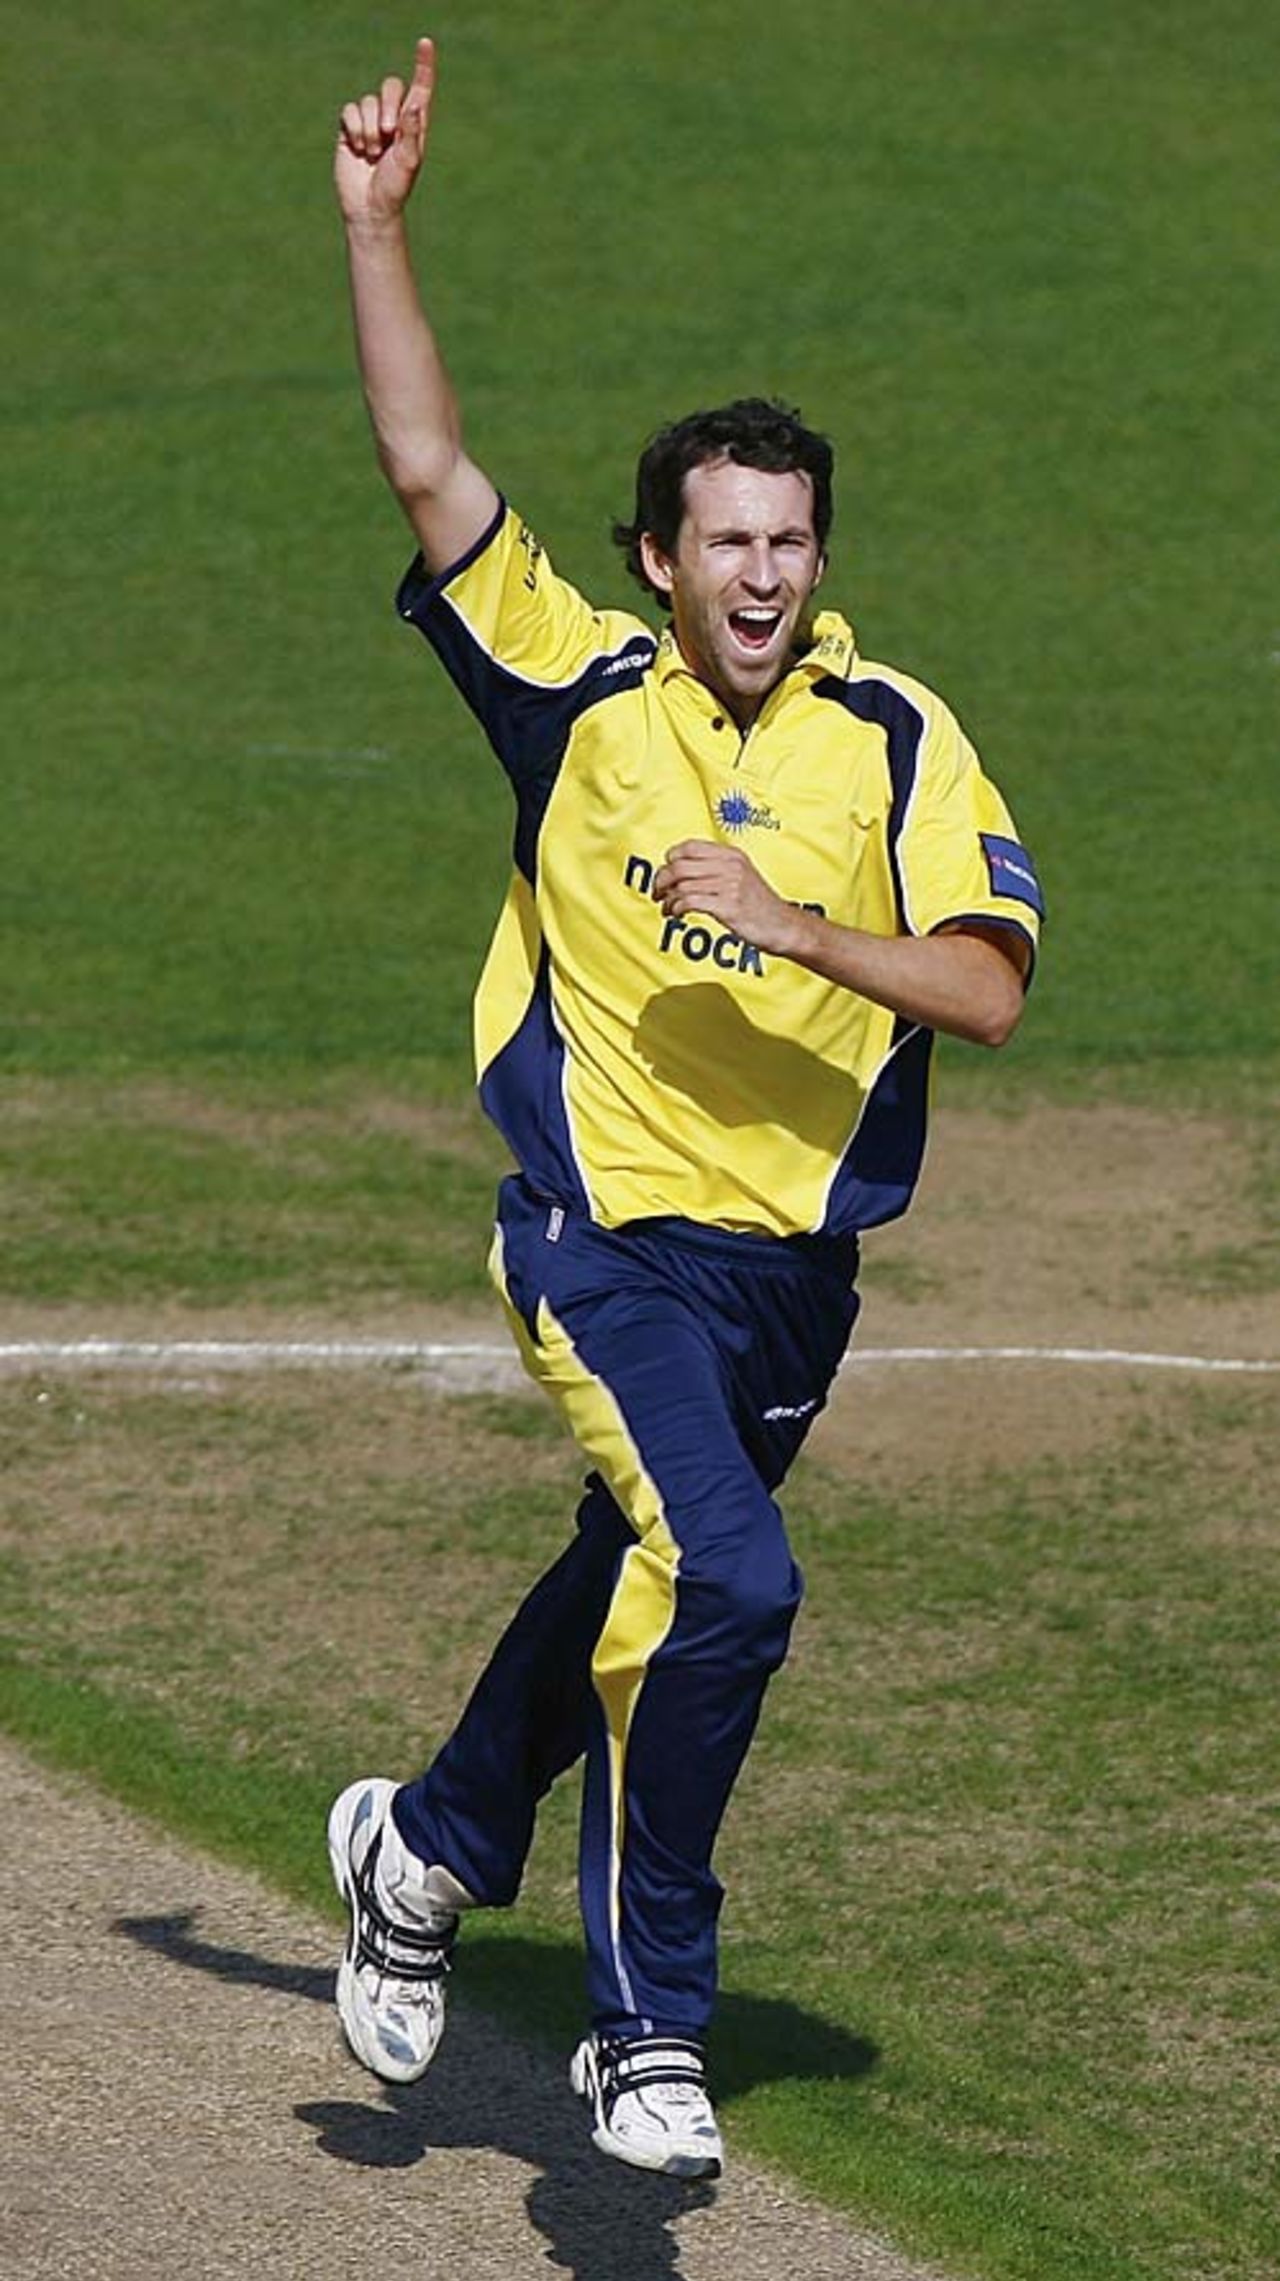 Graham Onions celebrates a wicket, Durham v Essex, Pro40, Chester-le-Street, September 17, 2006